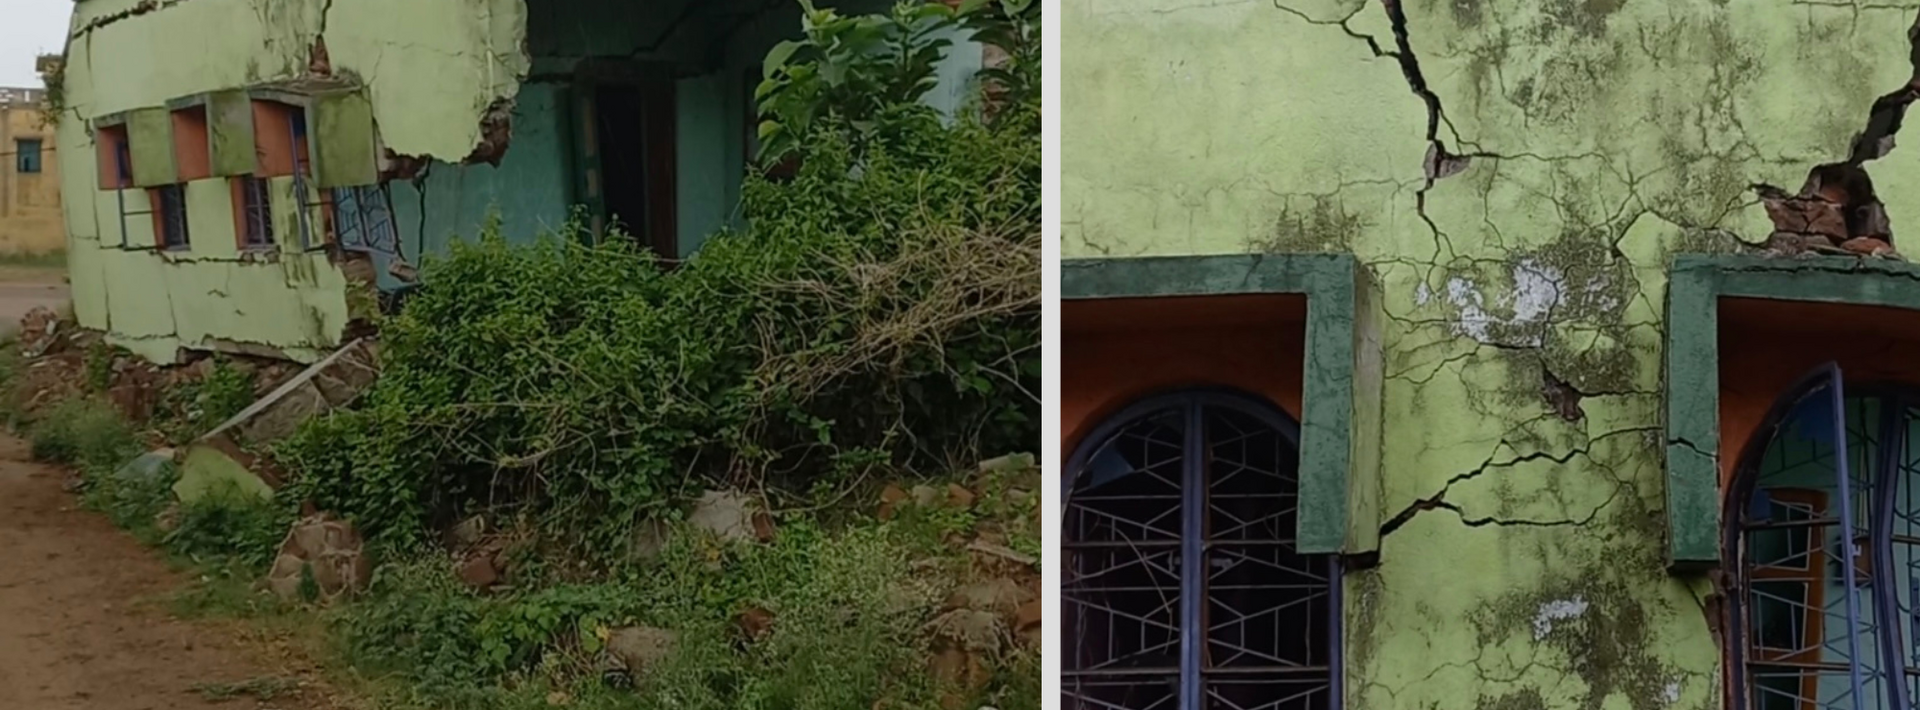 A longshot (left) and a close-up (right) of a broken green house which bears severe cracks in the walls.